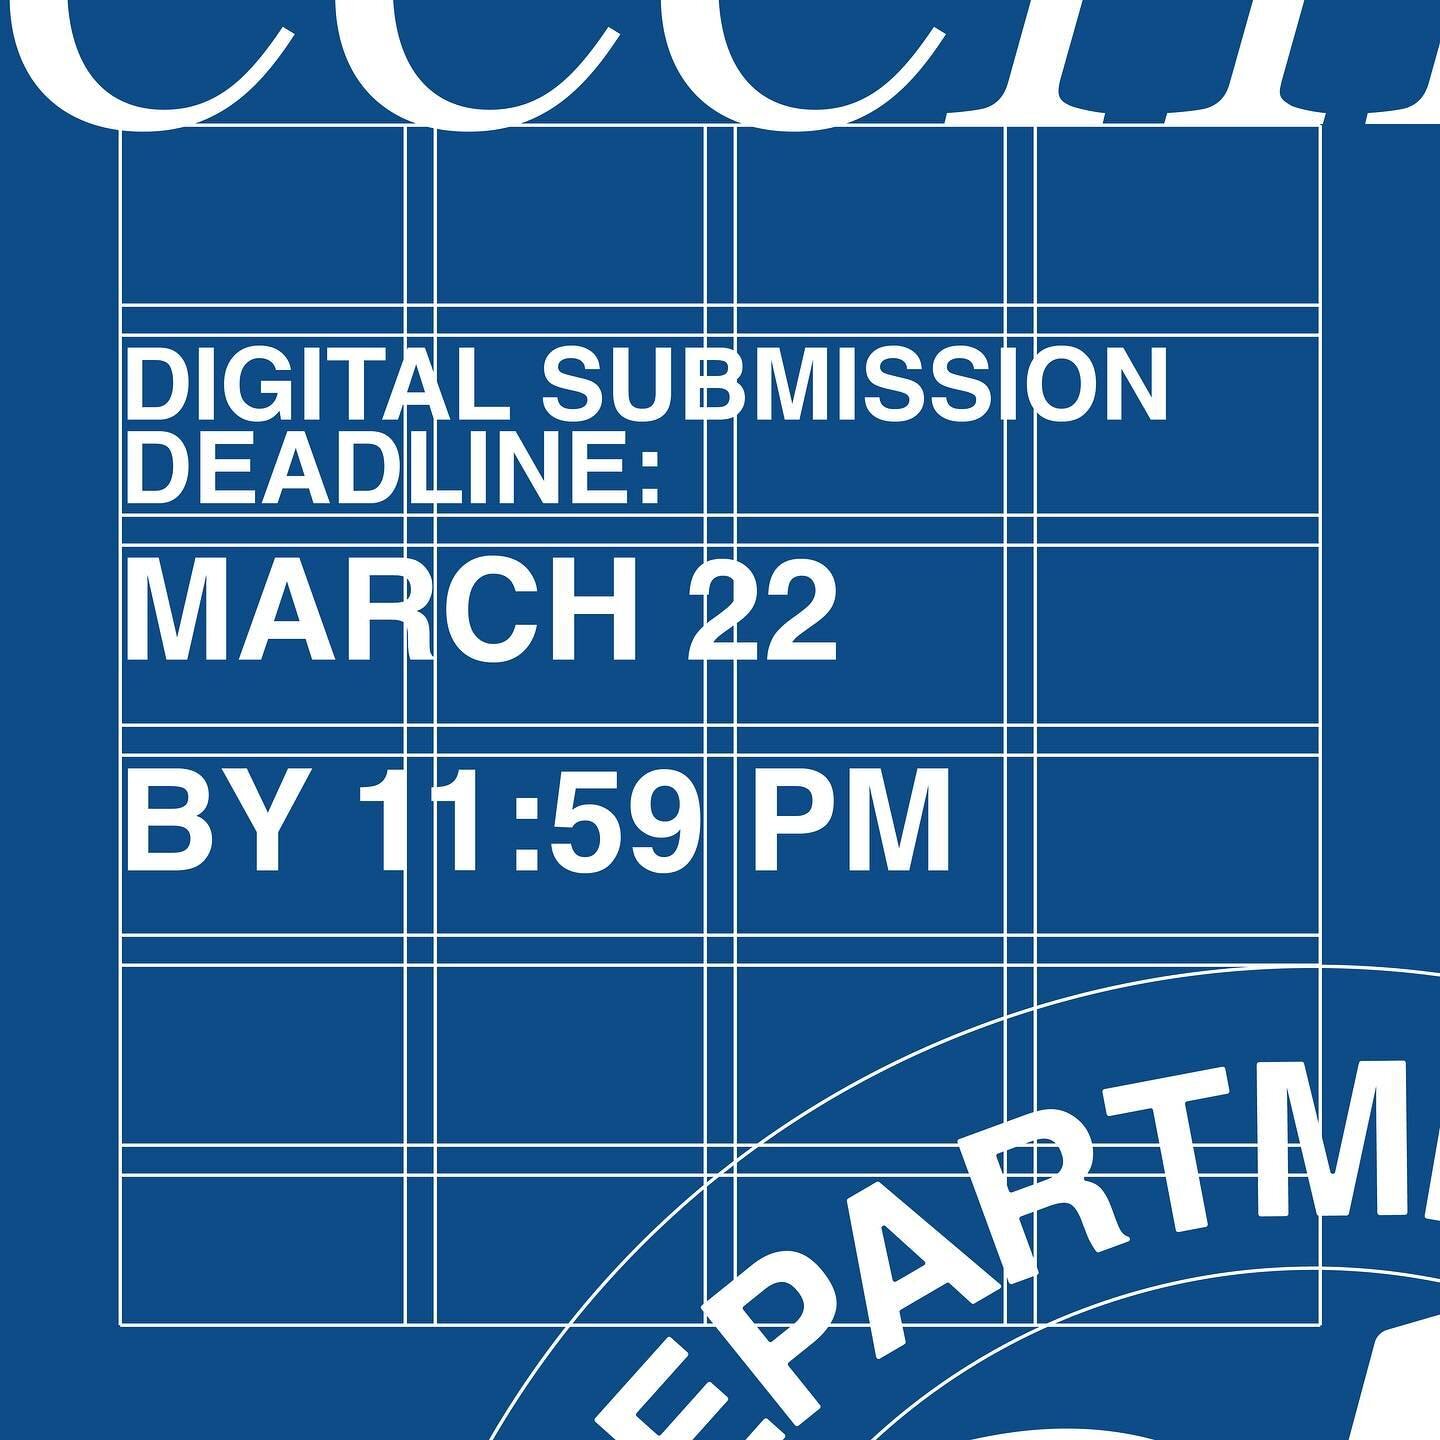 Reminder! Digital Submission for Department 24 is this Friday, March 22. Please read up on canvas and come to our informational zoom workshop this Wednesday if you haven&rsquo;t yet. 

Thank you guys for keeping up with our graphic design manifest sh